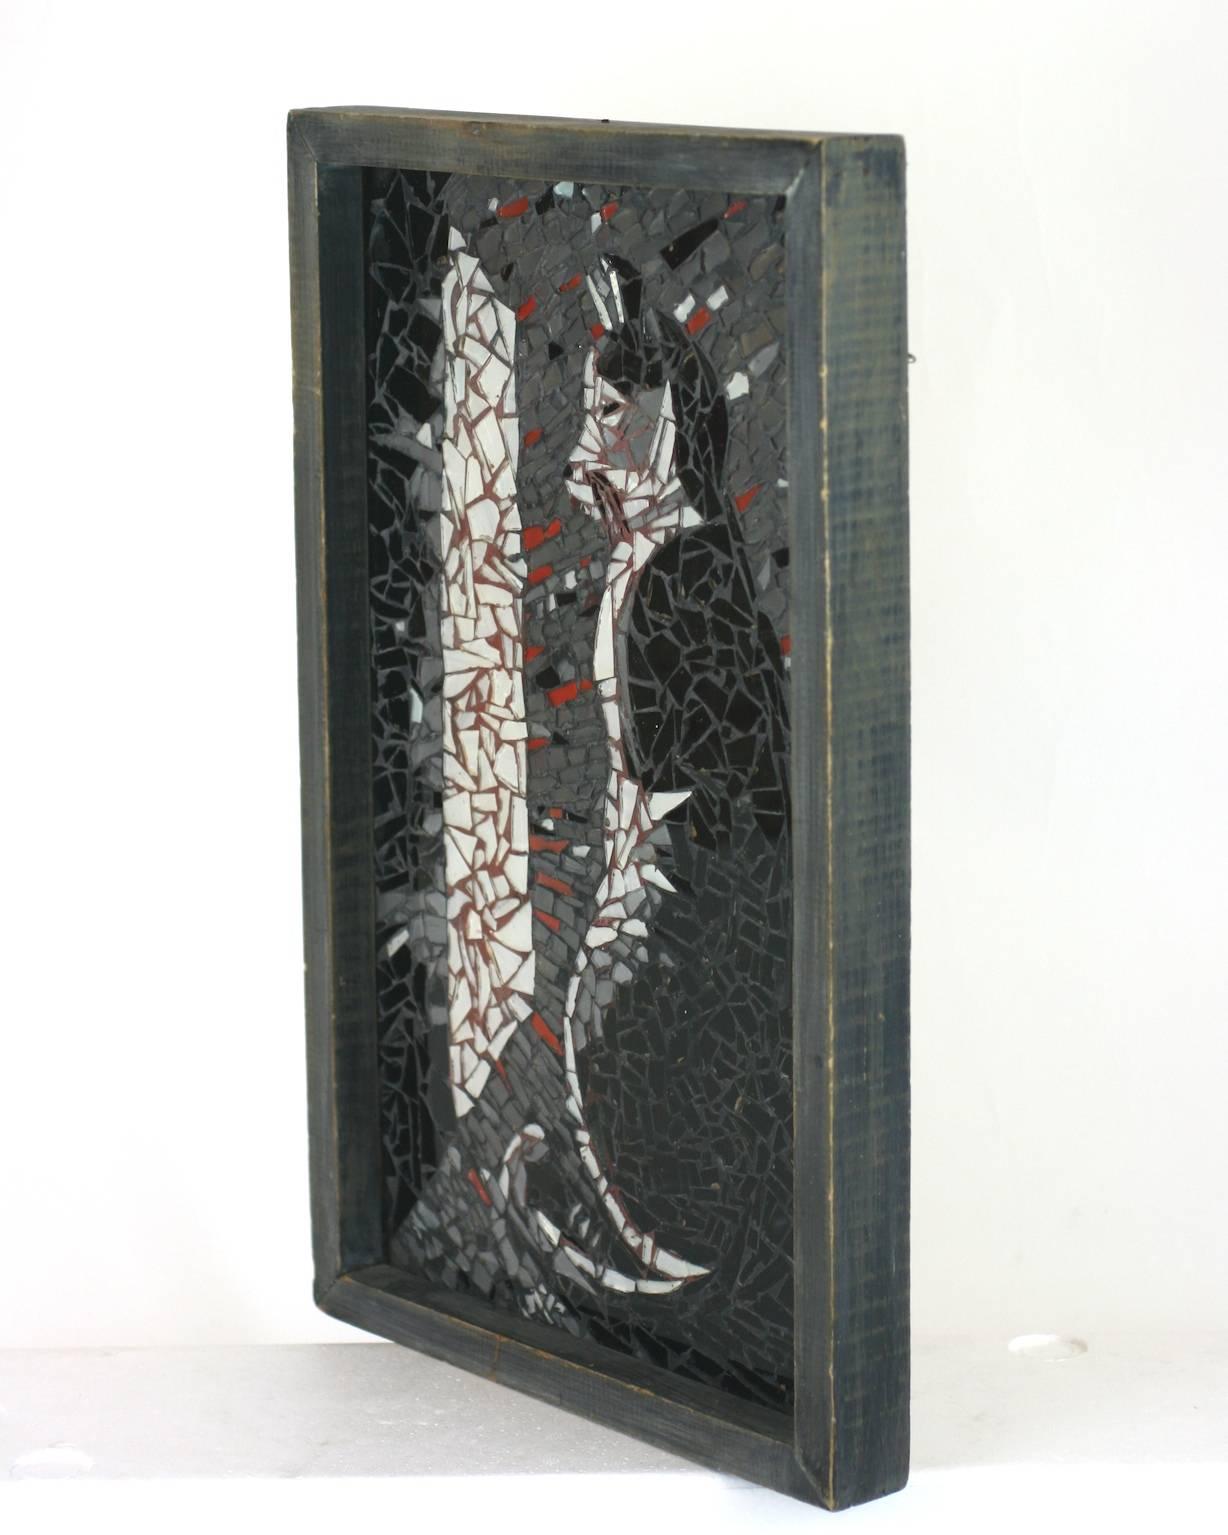 Charming Folk Art glass shard cat picture set within a grey washed handmade wood frame. Made with glass shard mosaics by hand depicting in an image of a cat peering out a window in striking shades of black, white and red.
1940s, USA. 
Measures: